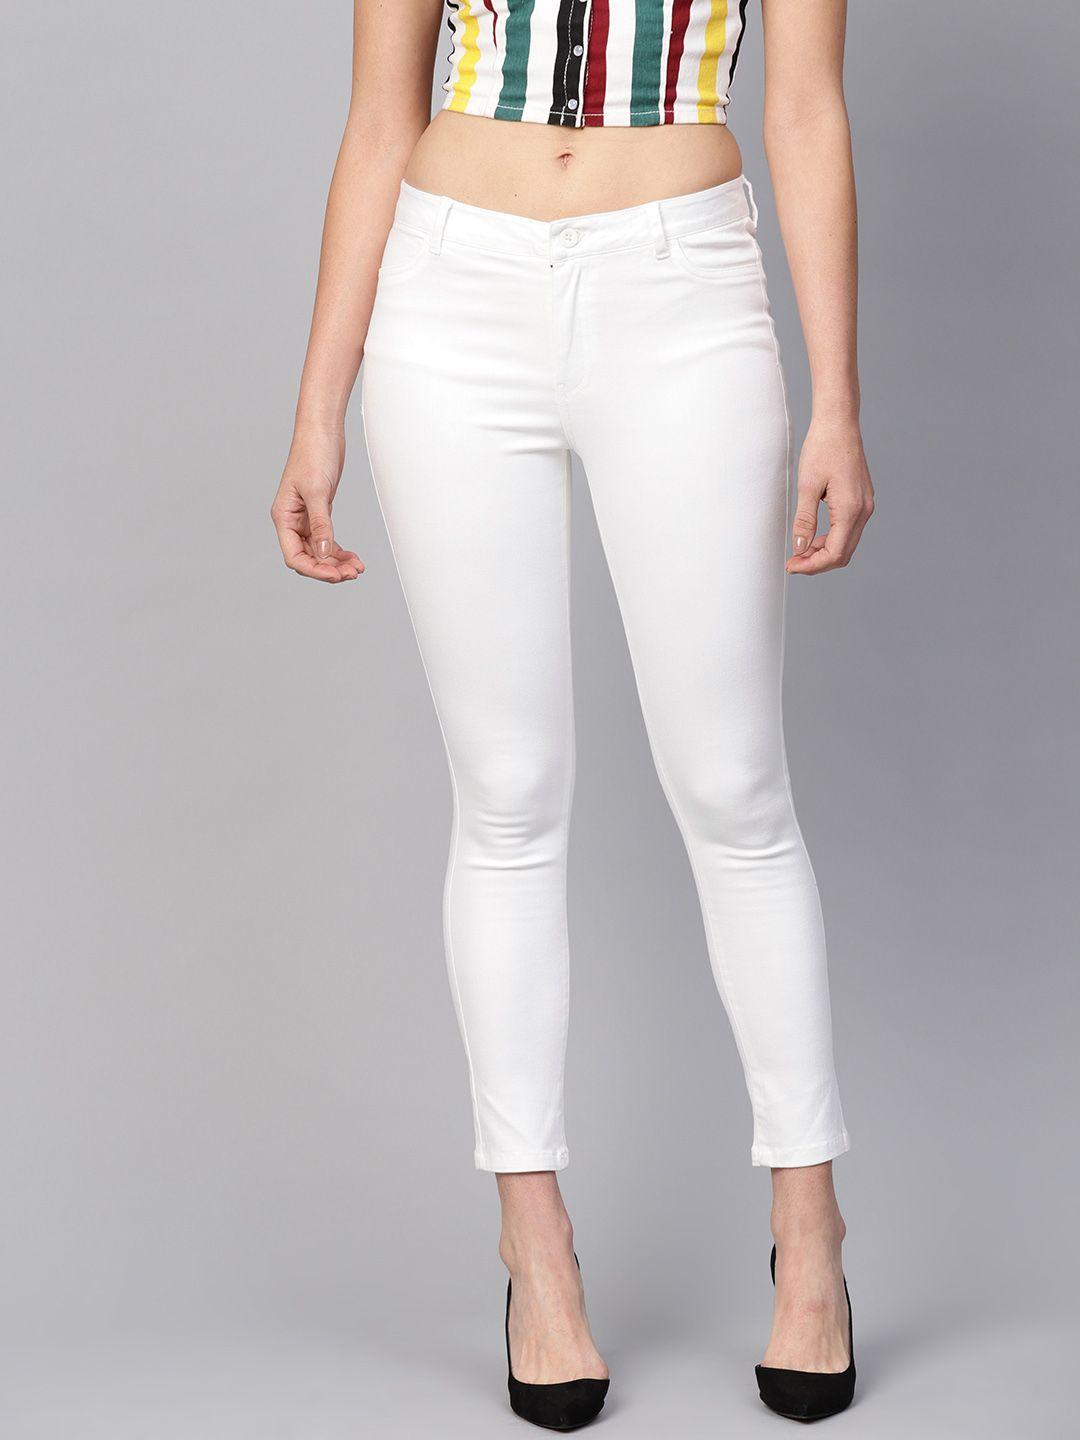 w women white regular fit mid-rise clean look stretchable jeans